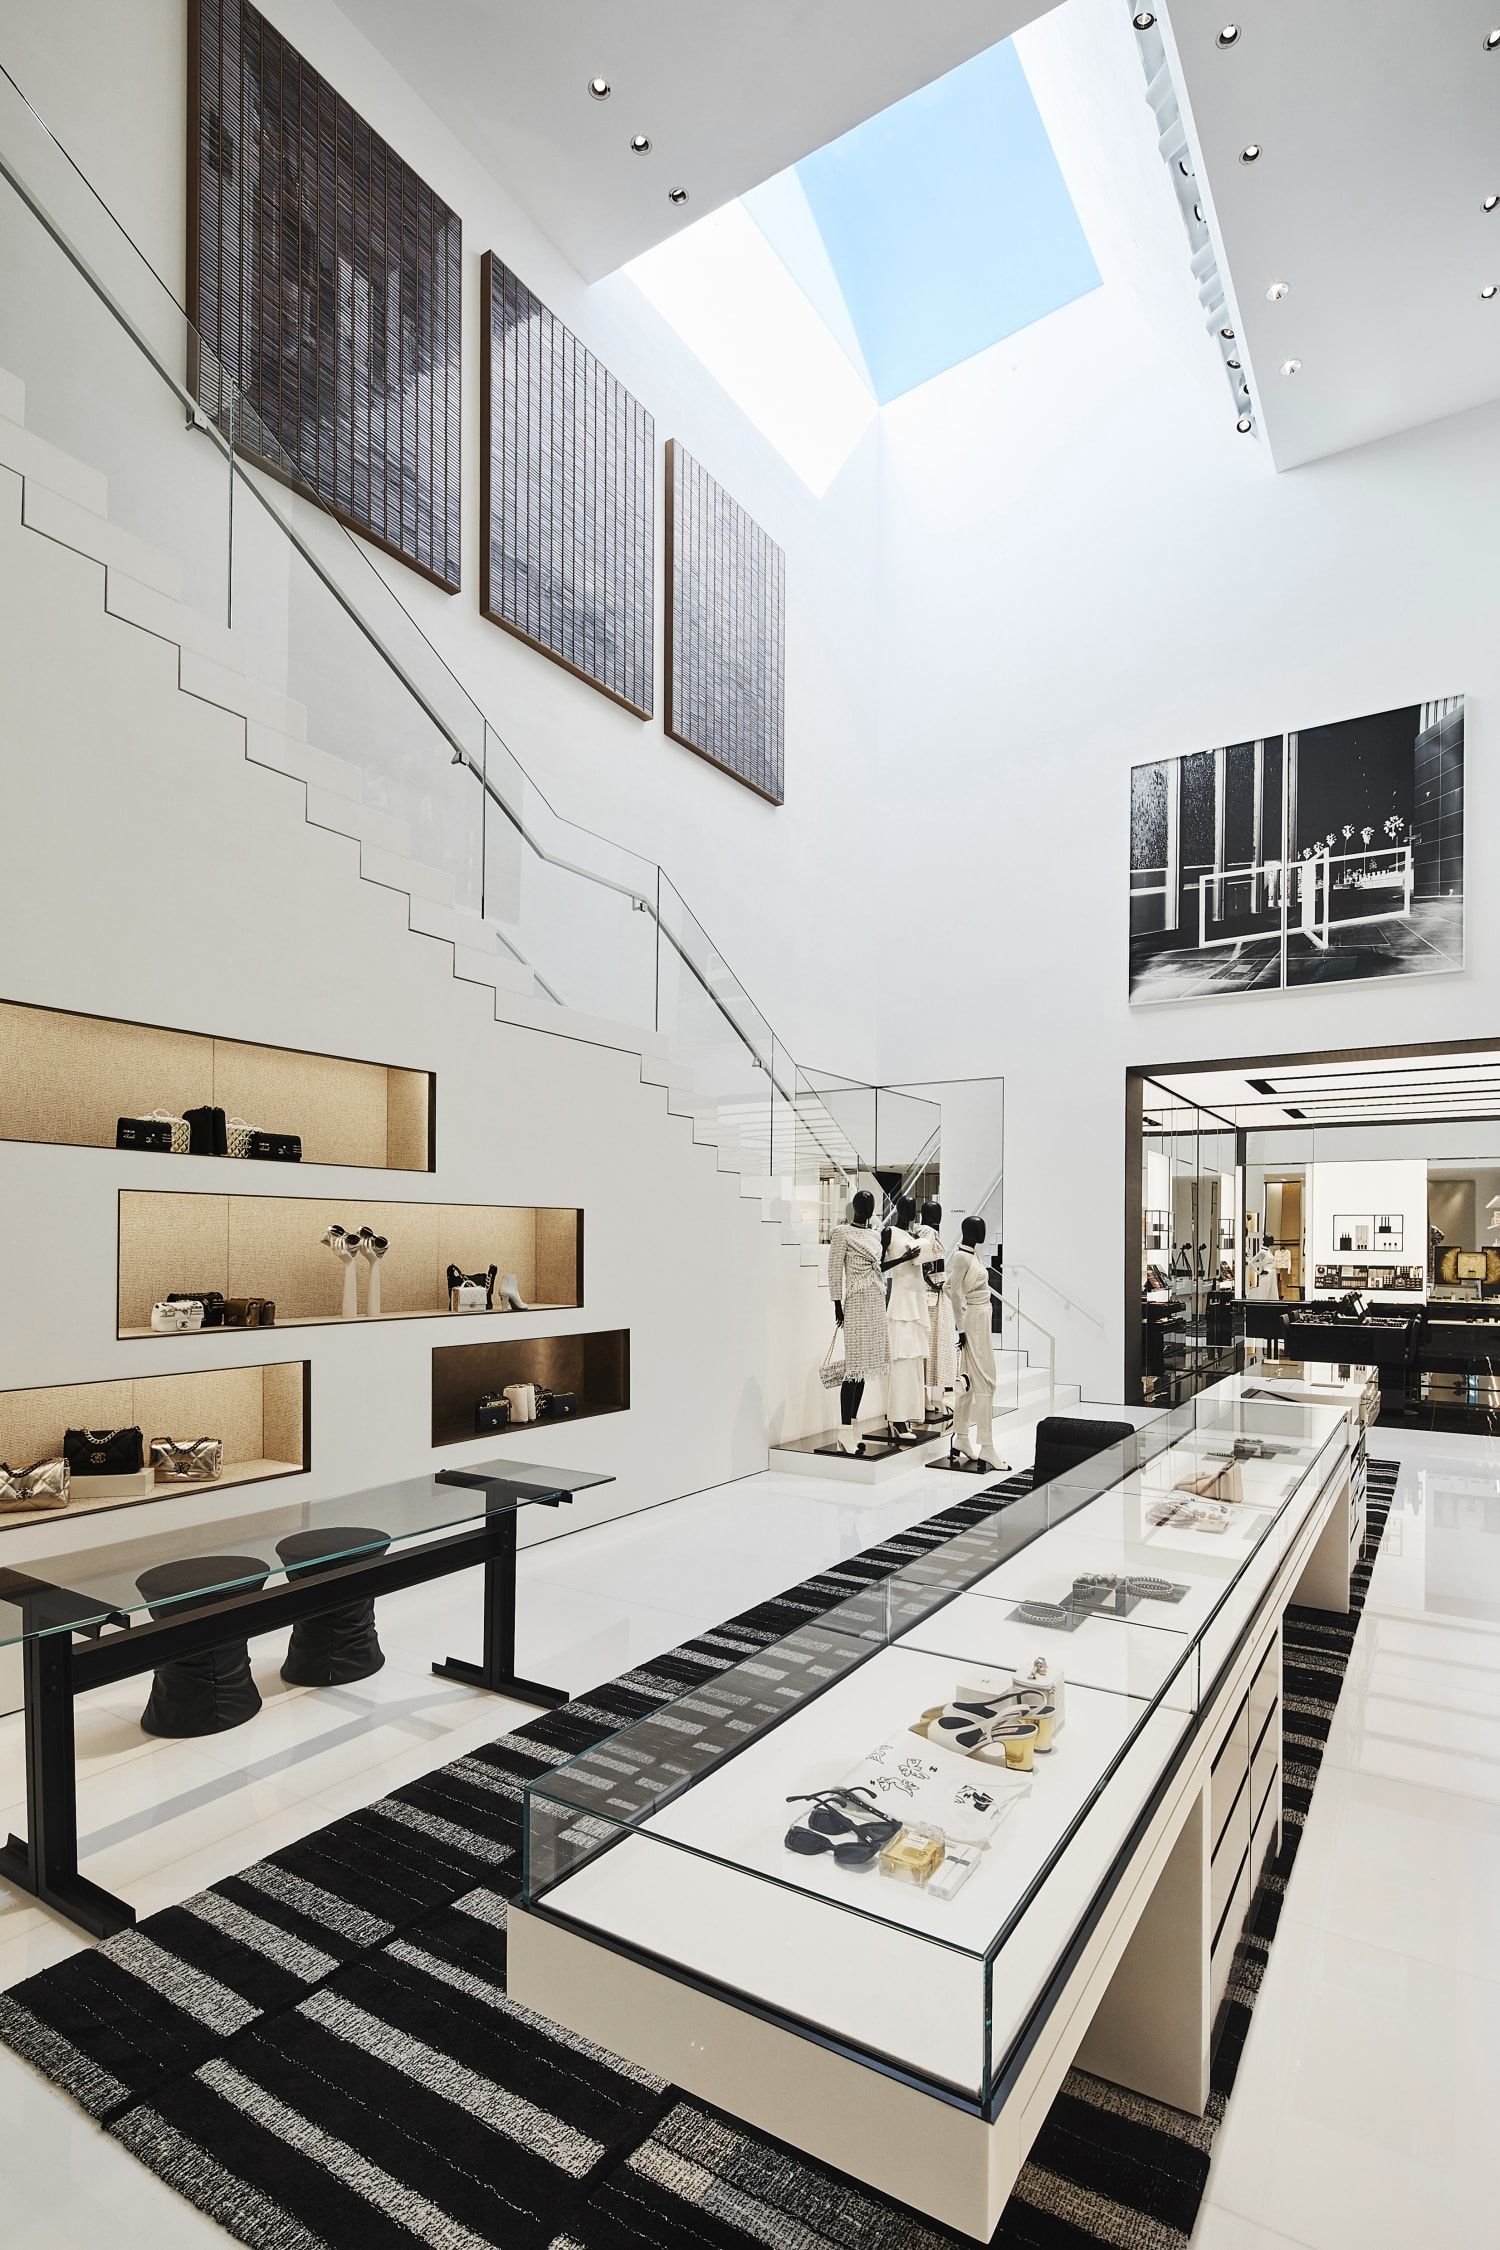 Chanel's new Marina Bay Sands store is designed by Peter Marino